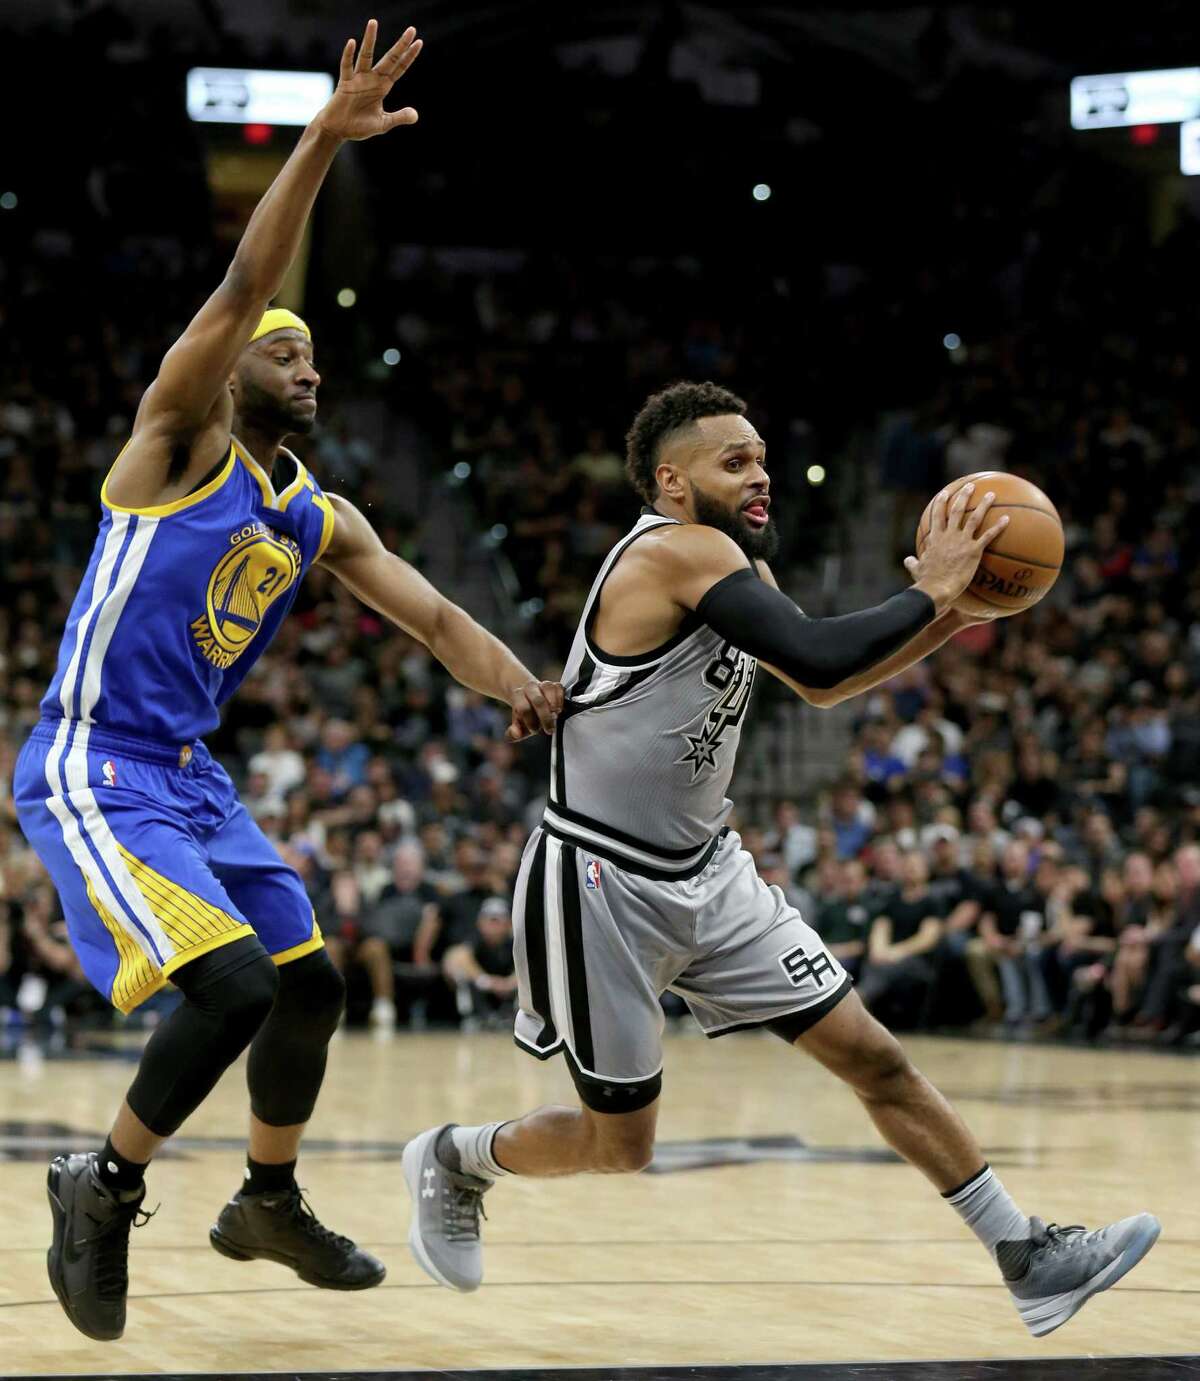 San Antonio Spurs' Patty Mills looks for room around Golden State Warriors' Ian Clark during first half action Saturday March 11, 2017 at the AT&T Center.